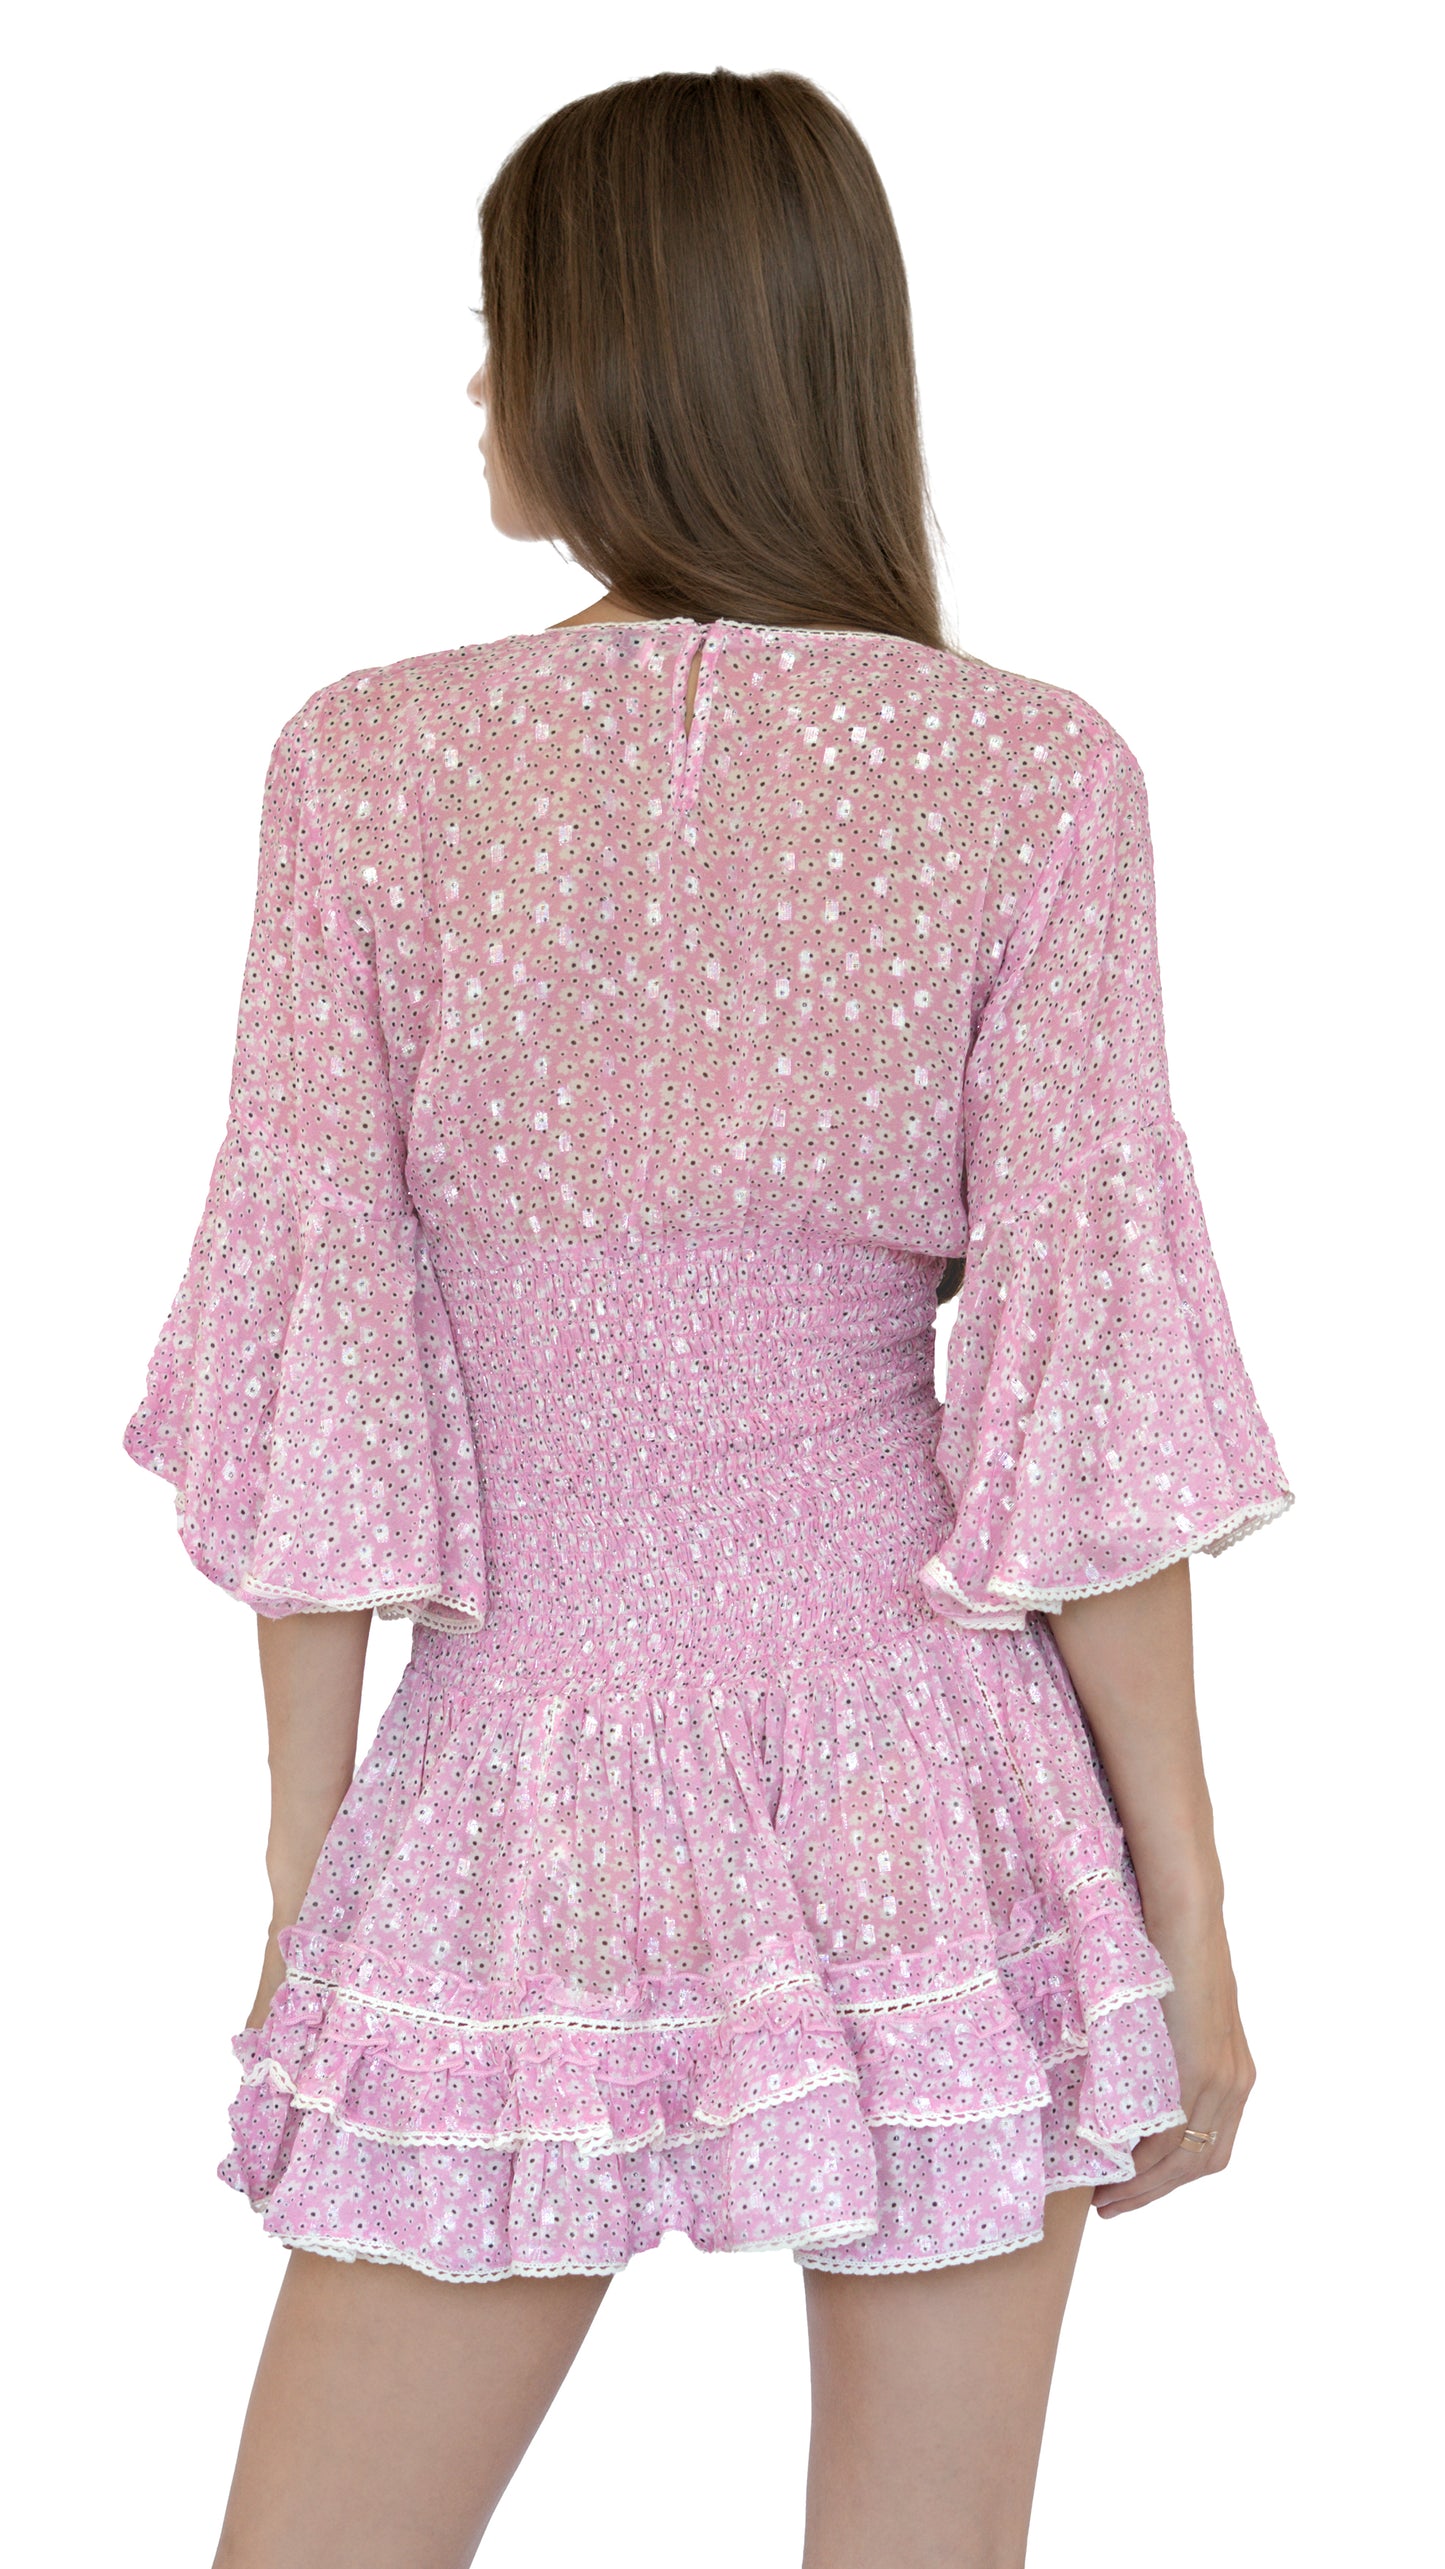 Sunday St Tropez Short pink dress smocked at the waist with ruffled sleeves. Floral print and embroidered finishes.